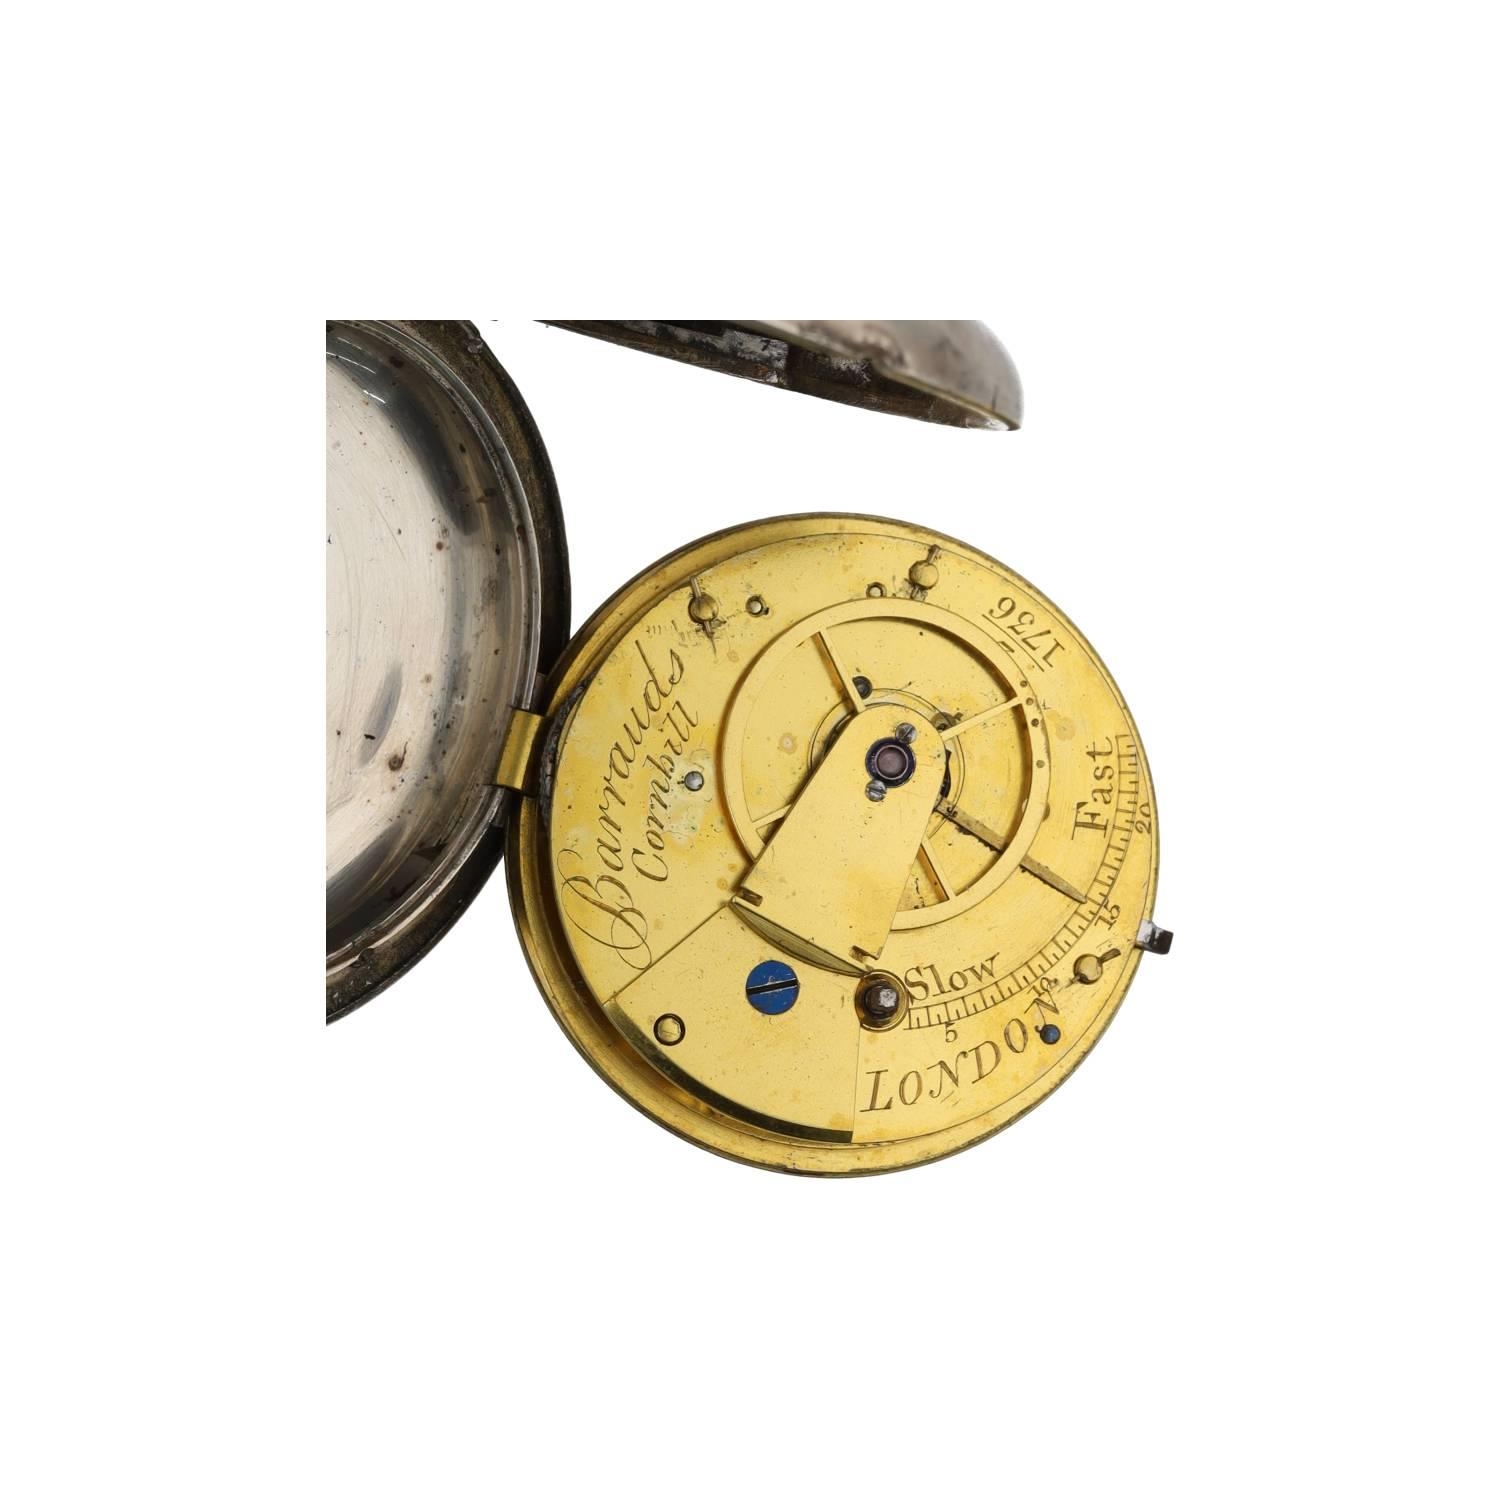 Barrauds, London - George IV silver verge hunter pocket watch, London 1824, the fusee movement - Image 3 of 5